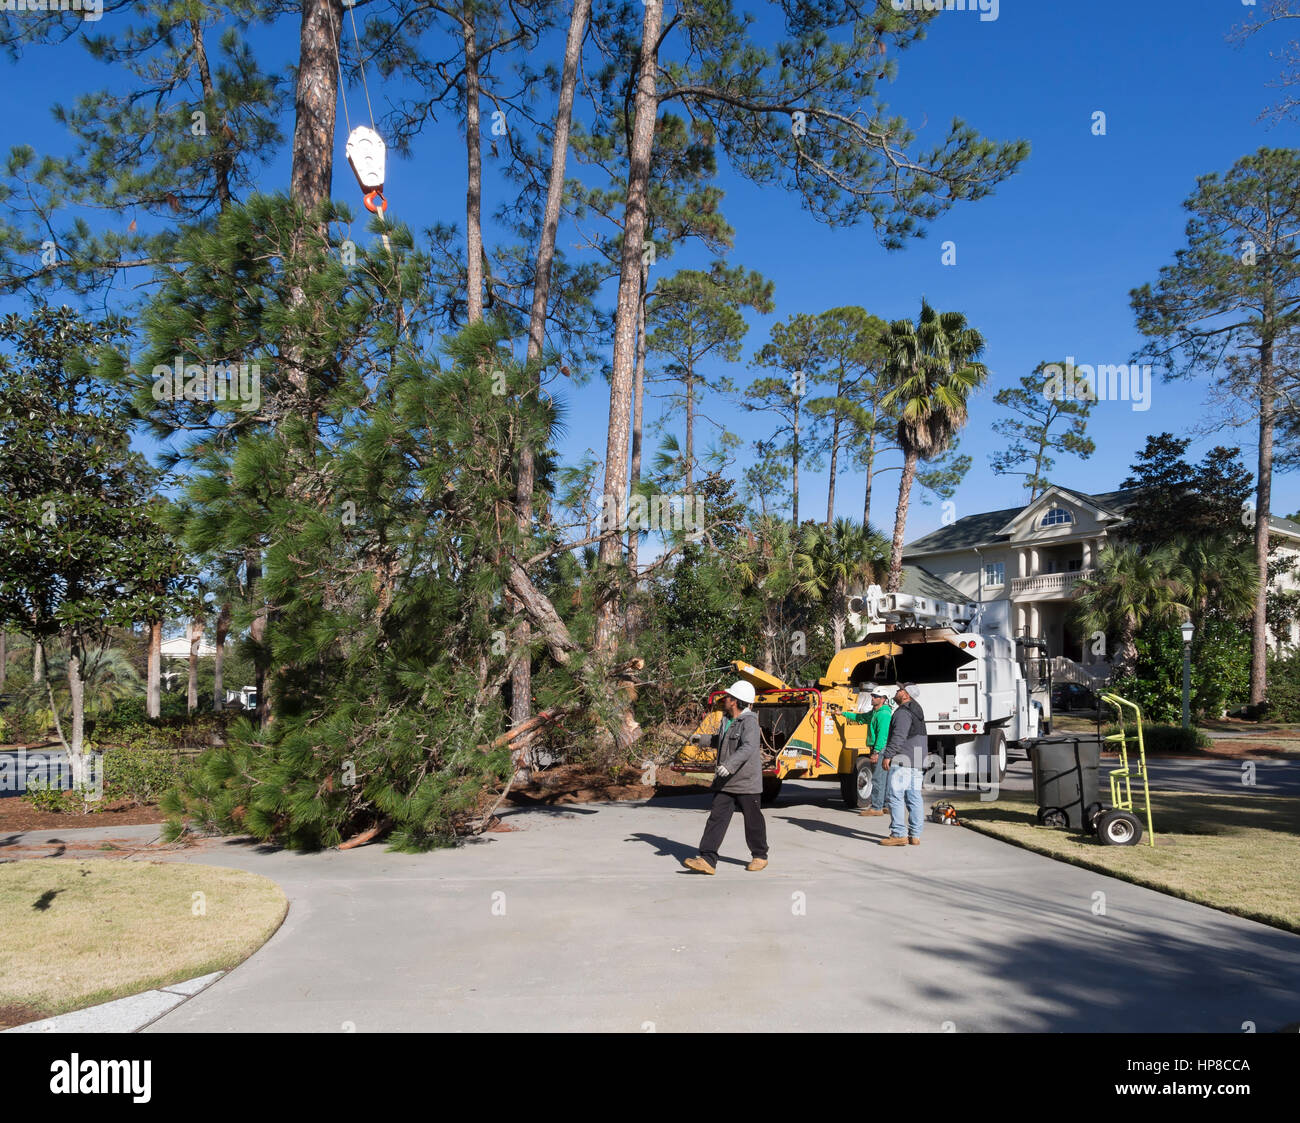 Part of a large pine tree is fed into a chipper during removal Stock Photo